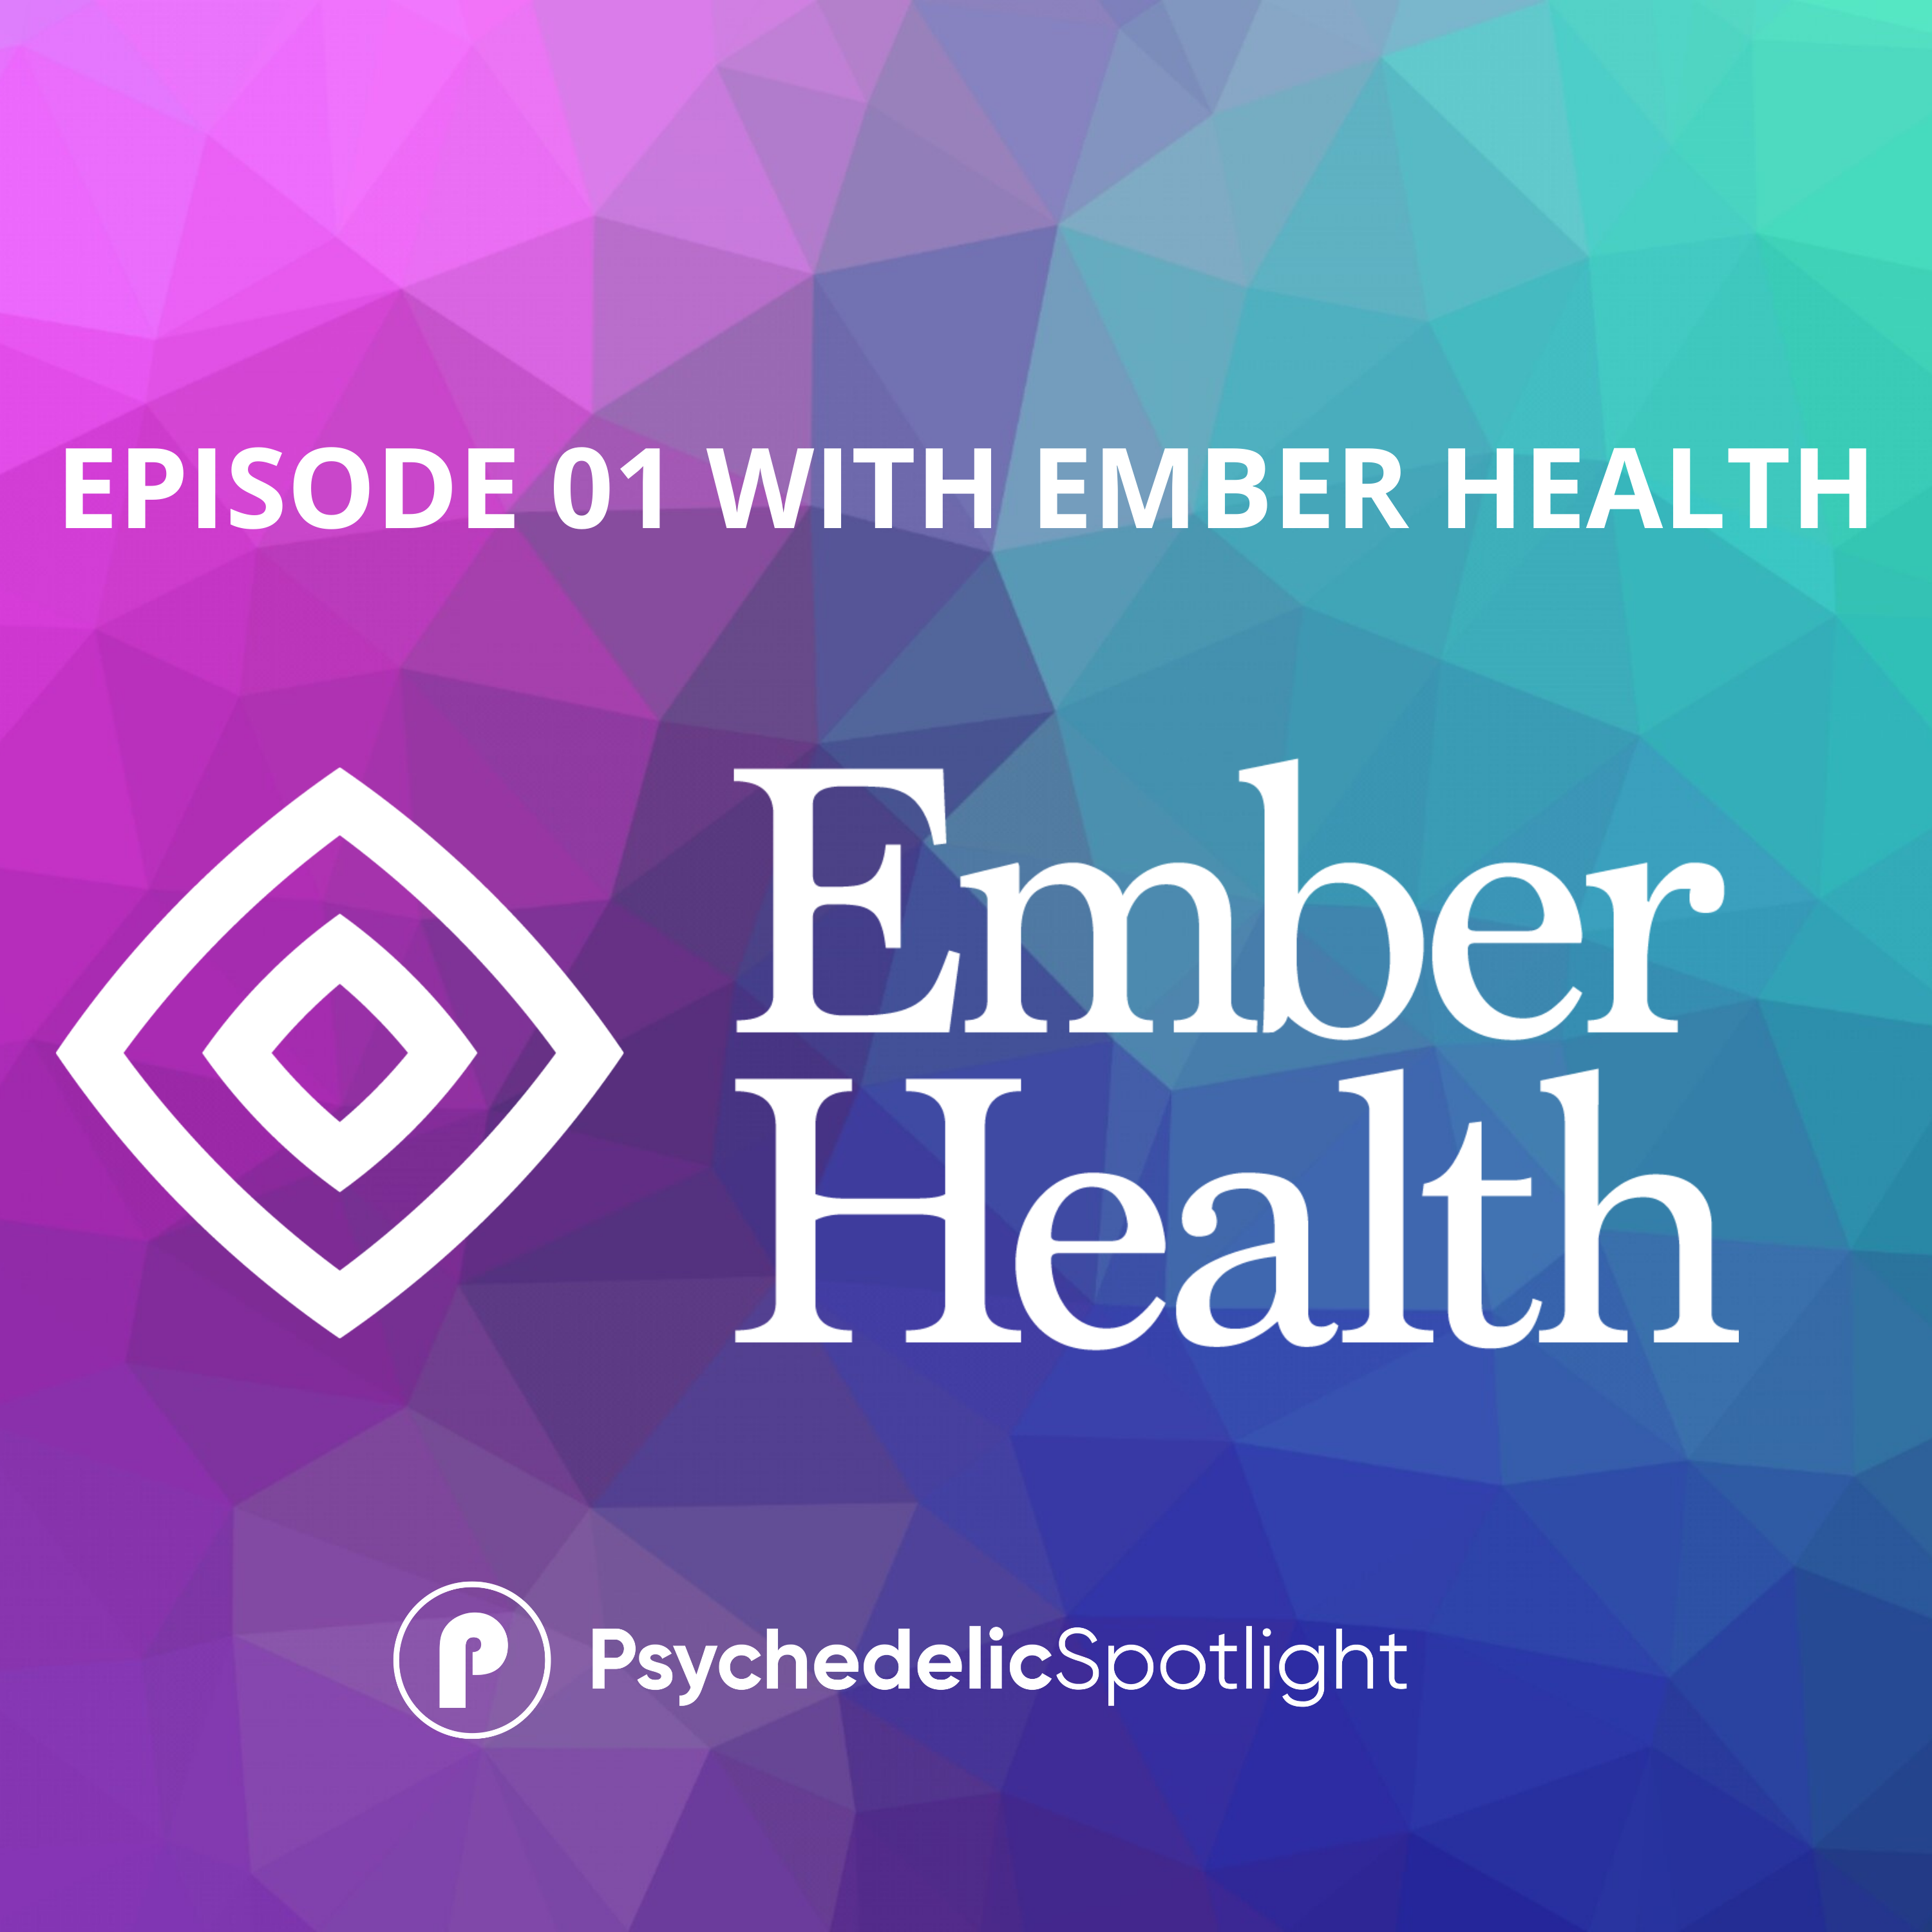 Interview with Ember Health